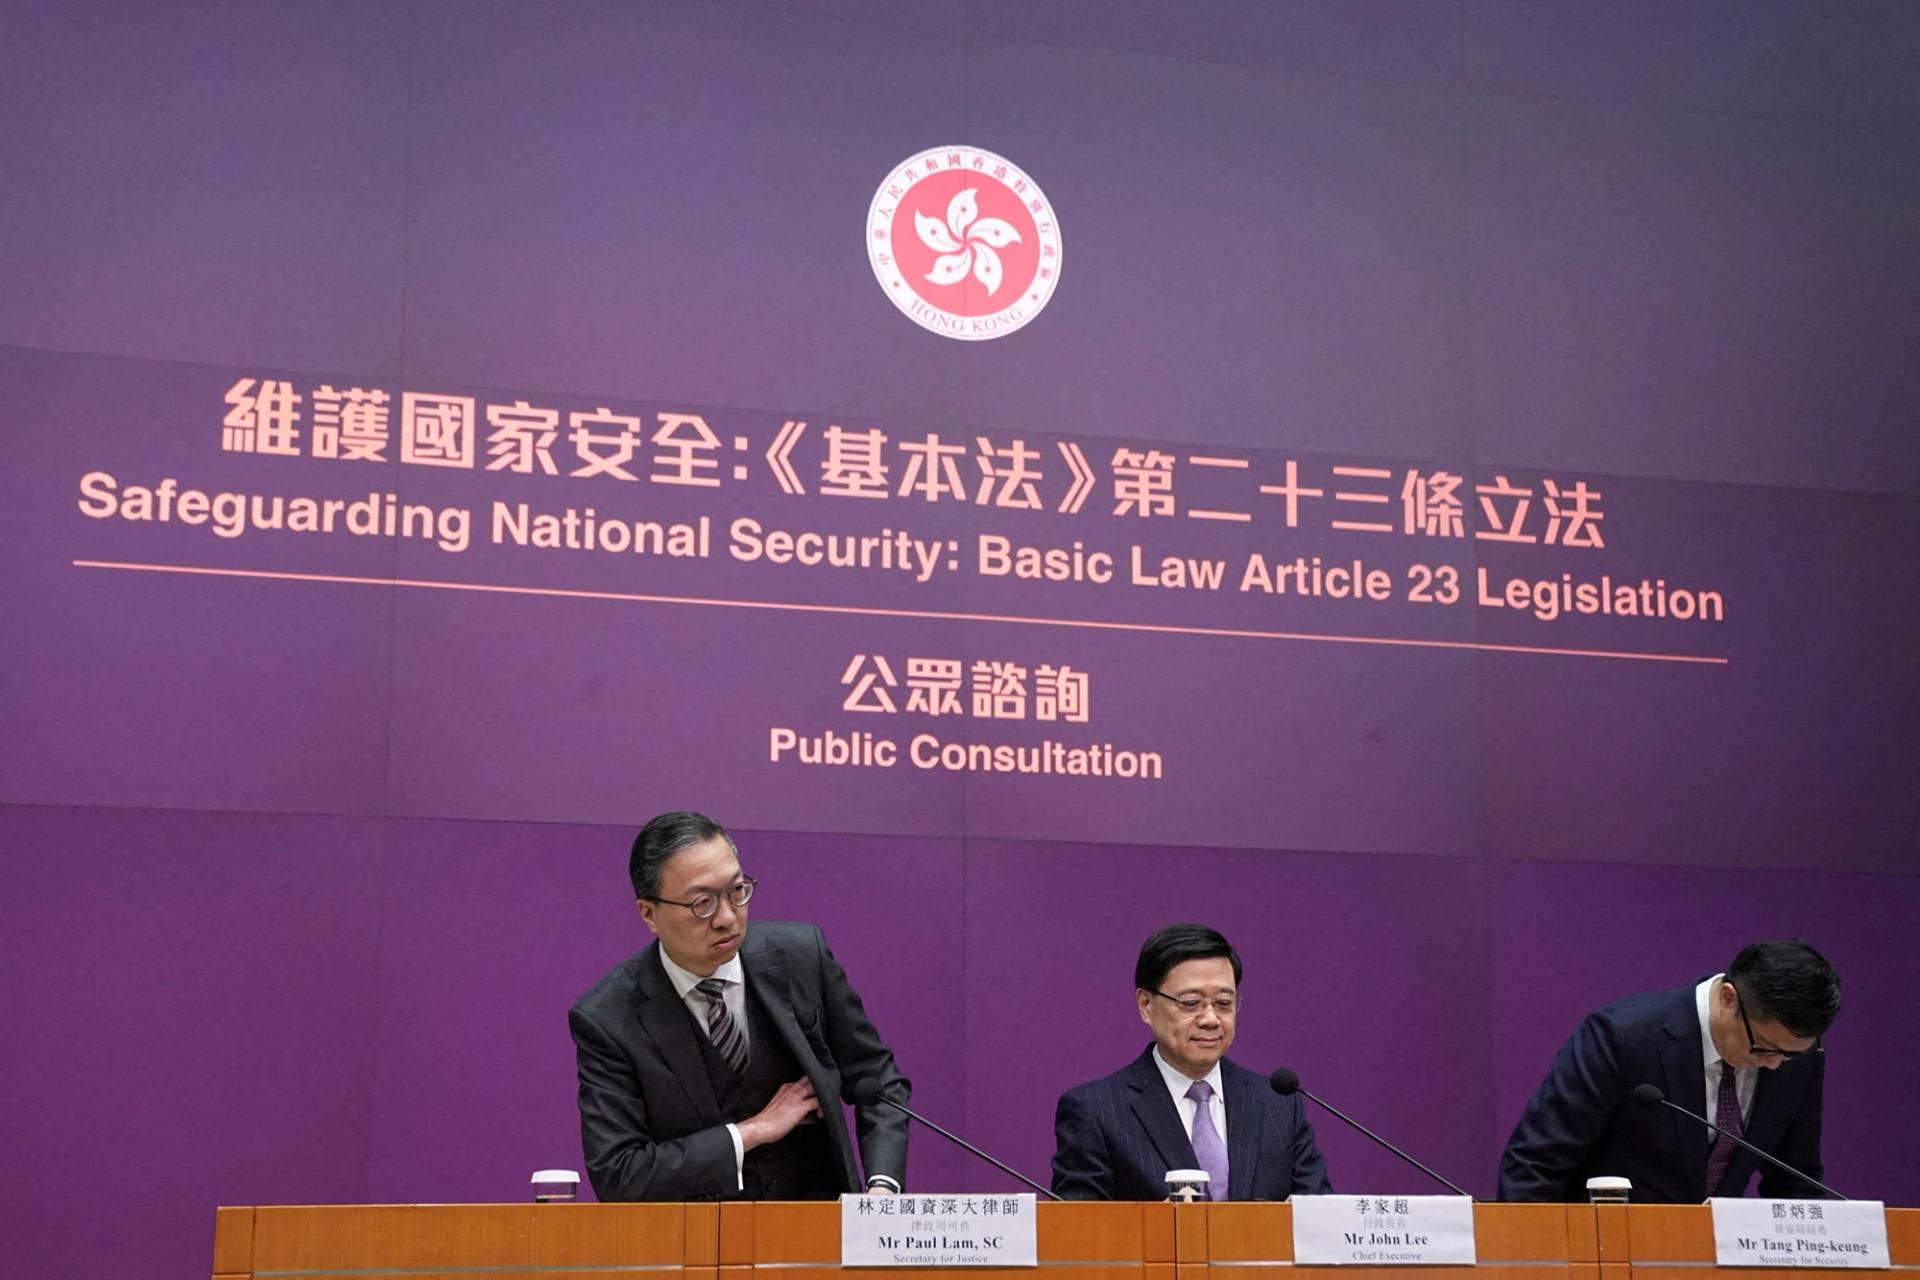 Hong Kong's Secretary for Justice Paul Lam, Chief Executive John Lee and Secretary for Security Chris Tang Ping-keung attend a press conference regarding the legislation of Article 23 national security laws, in Hong Kong.